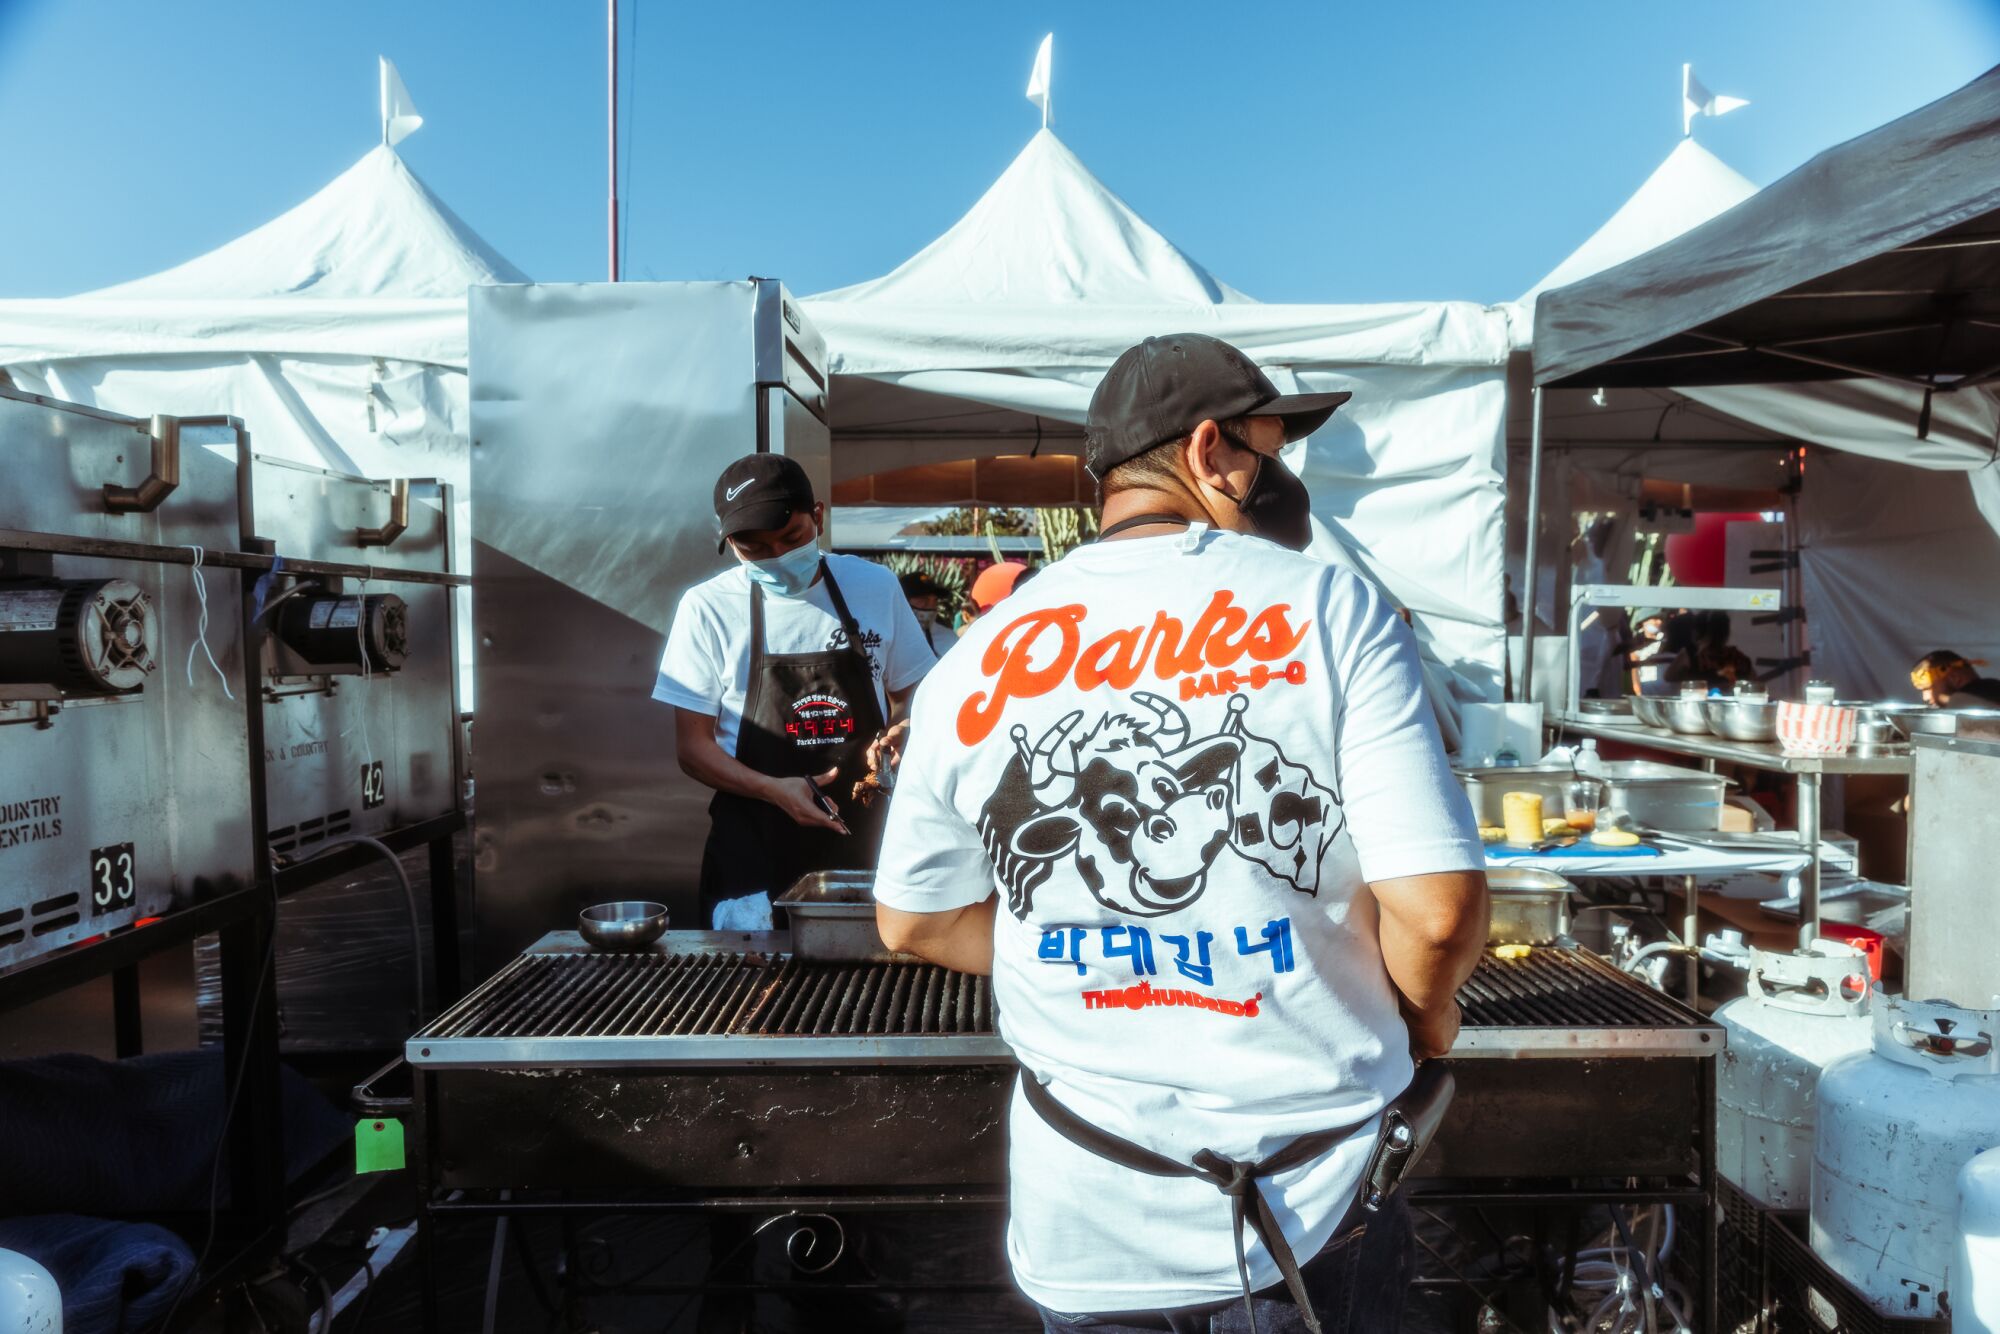 A man in a Park's BBQ T-shirt stands at a grill.